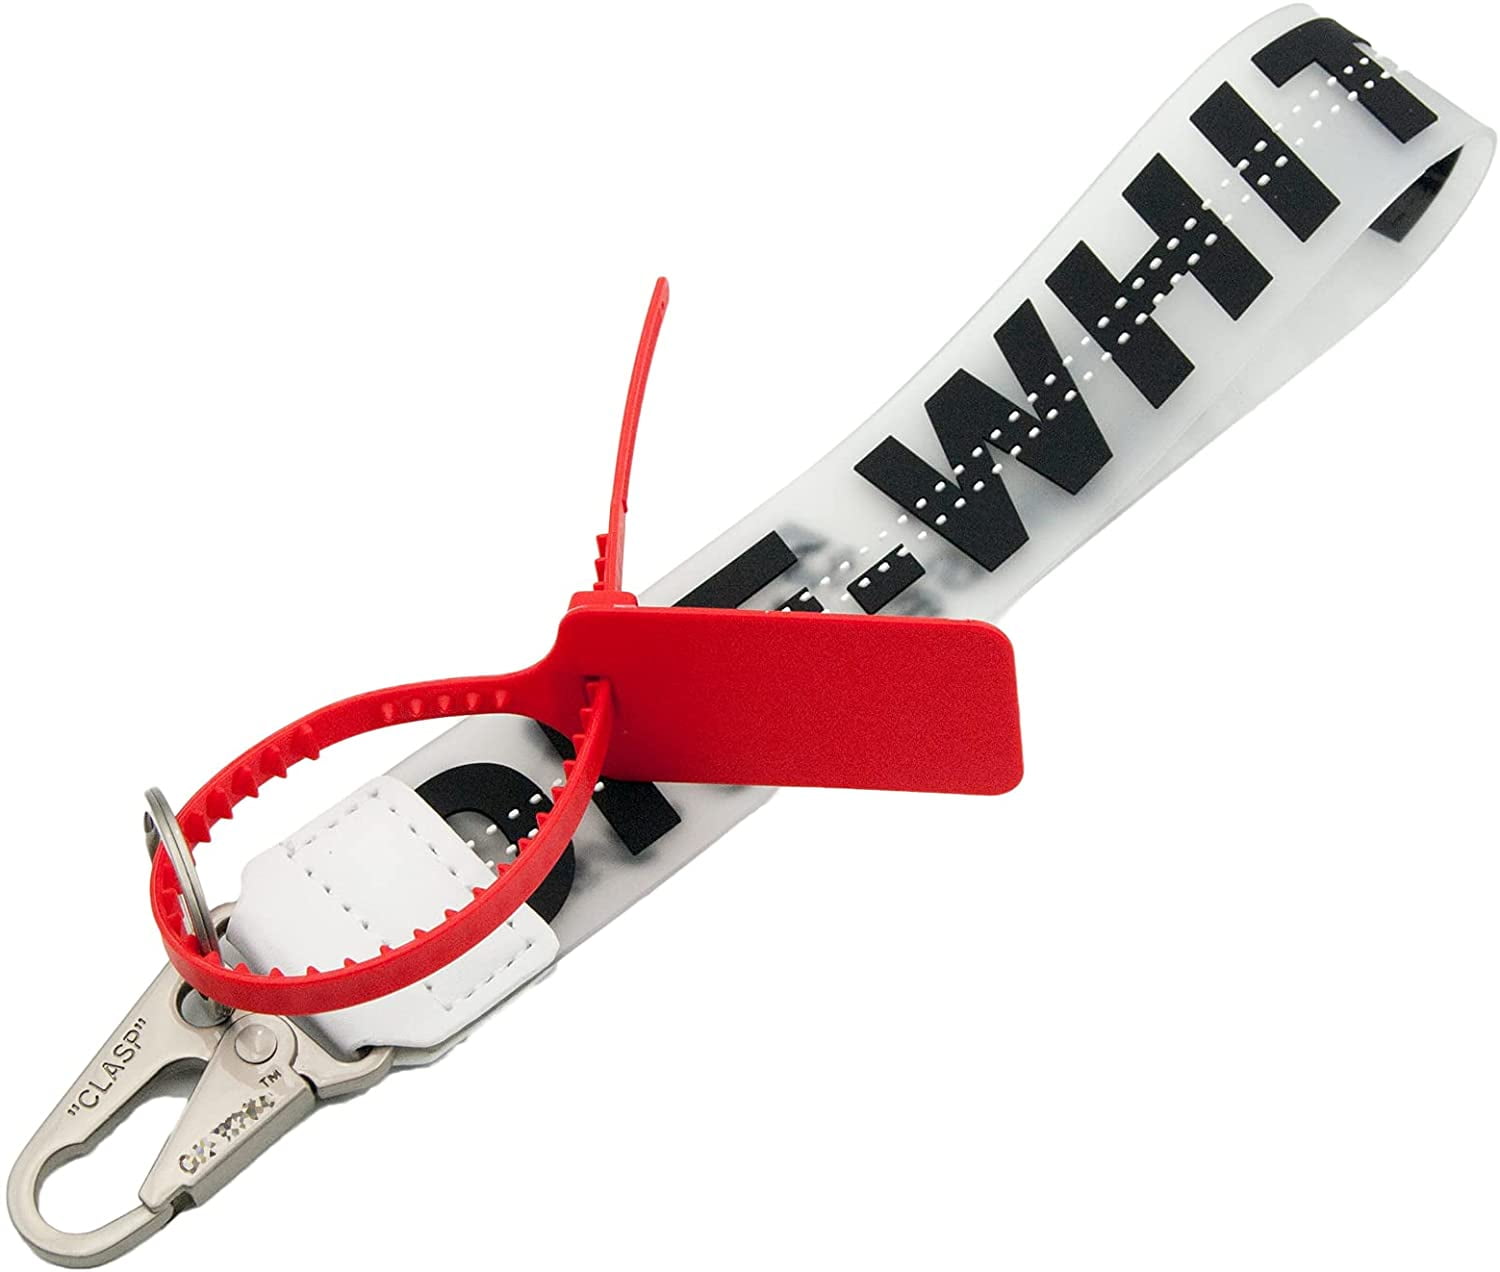 Black Personality Industrial Belt Rubber Strap Office Badge Lanyard Include The Red Lock Catch Off Keychain 